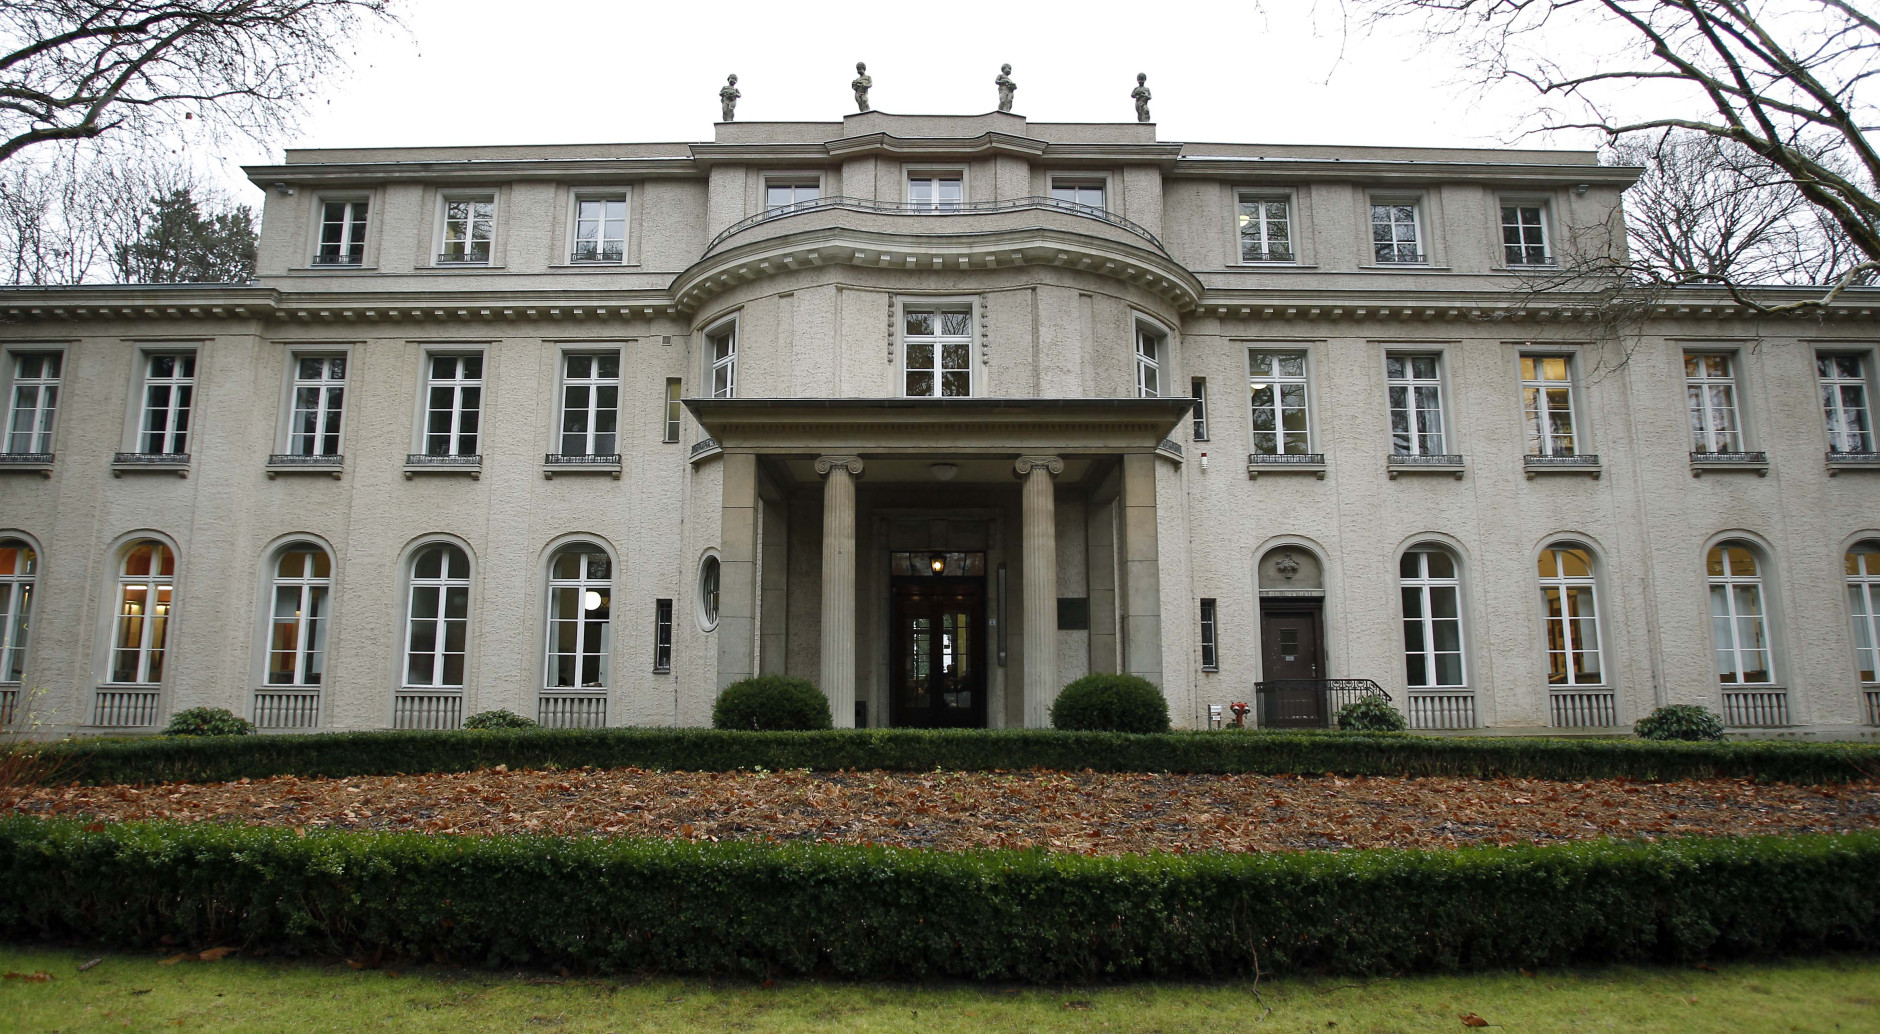 Exterior view of the house of the 'Wannsee Conference' in Berlin, Germany, Friday, Jan. 20, 2012. In this house, a former industrialist's villa used from 1941 to 1945 by the SS as a conference center and guest house, on 20 January 1942, fifteen high-ranking representatives of the SS, the NSDAP (National Socialist German Workers' Party) and various ministries met to discuss their cooperation in the planned deportation and murder of the European Jews. (AP Photo/Michael Sohn, Pool)